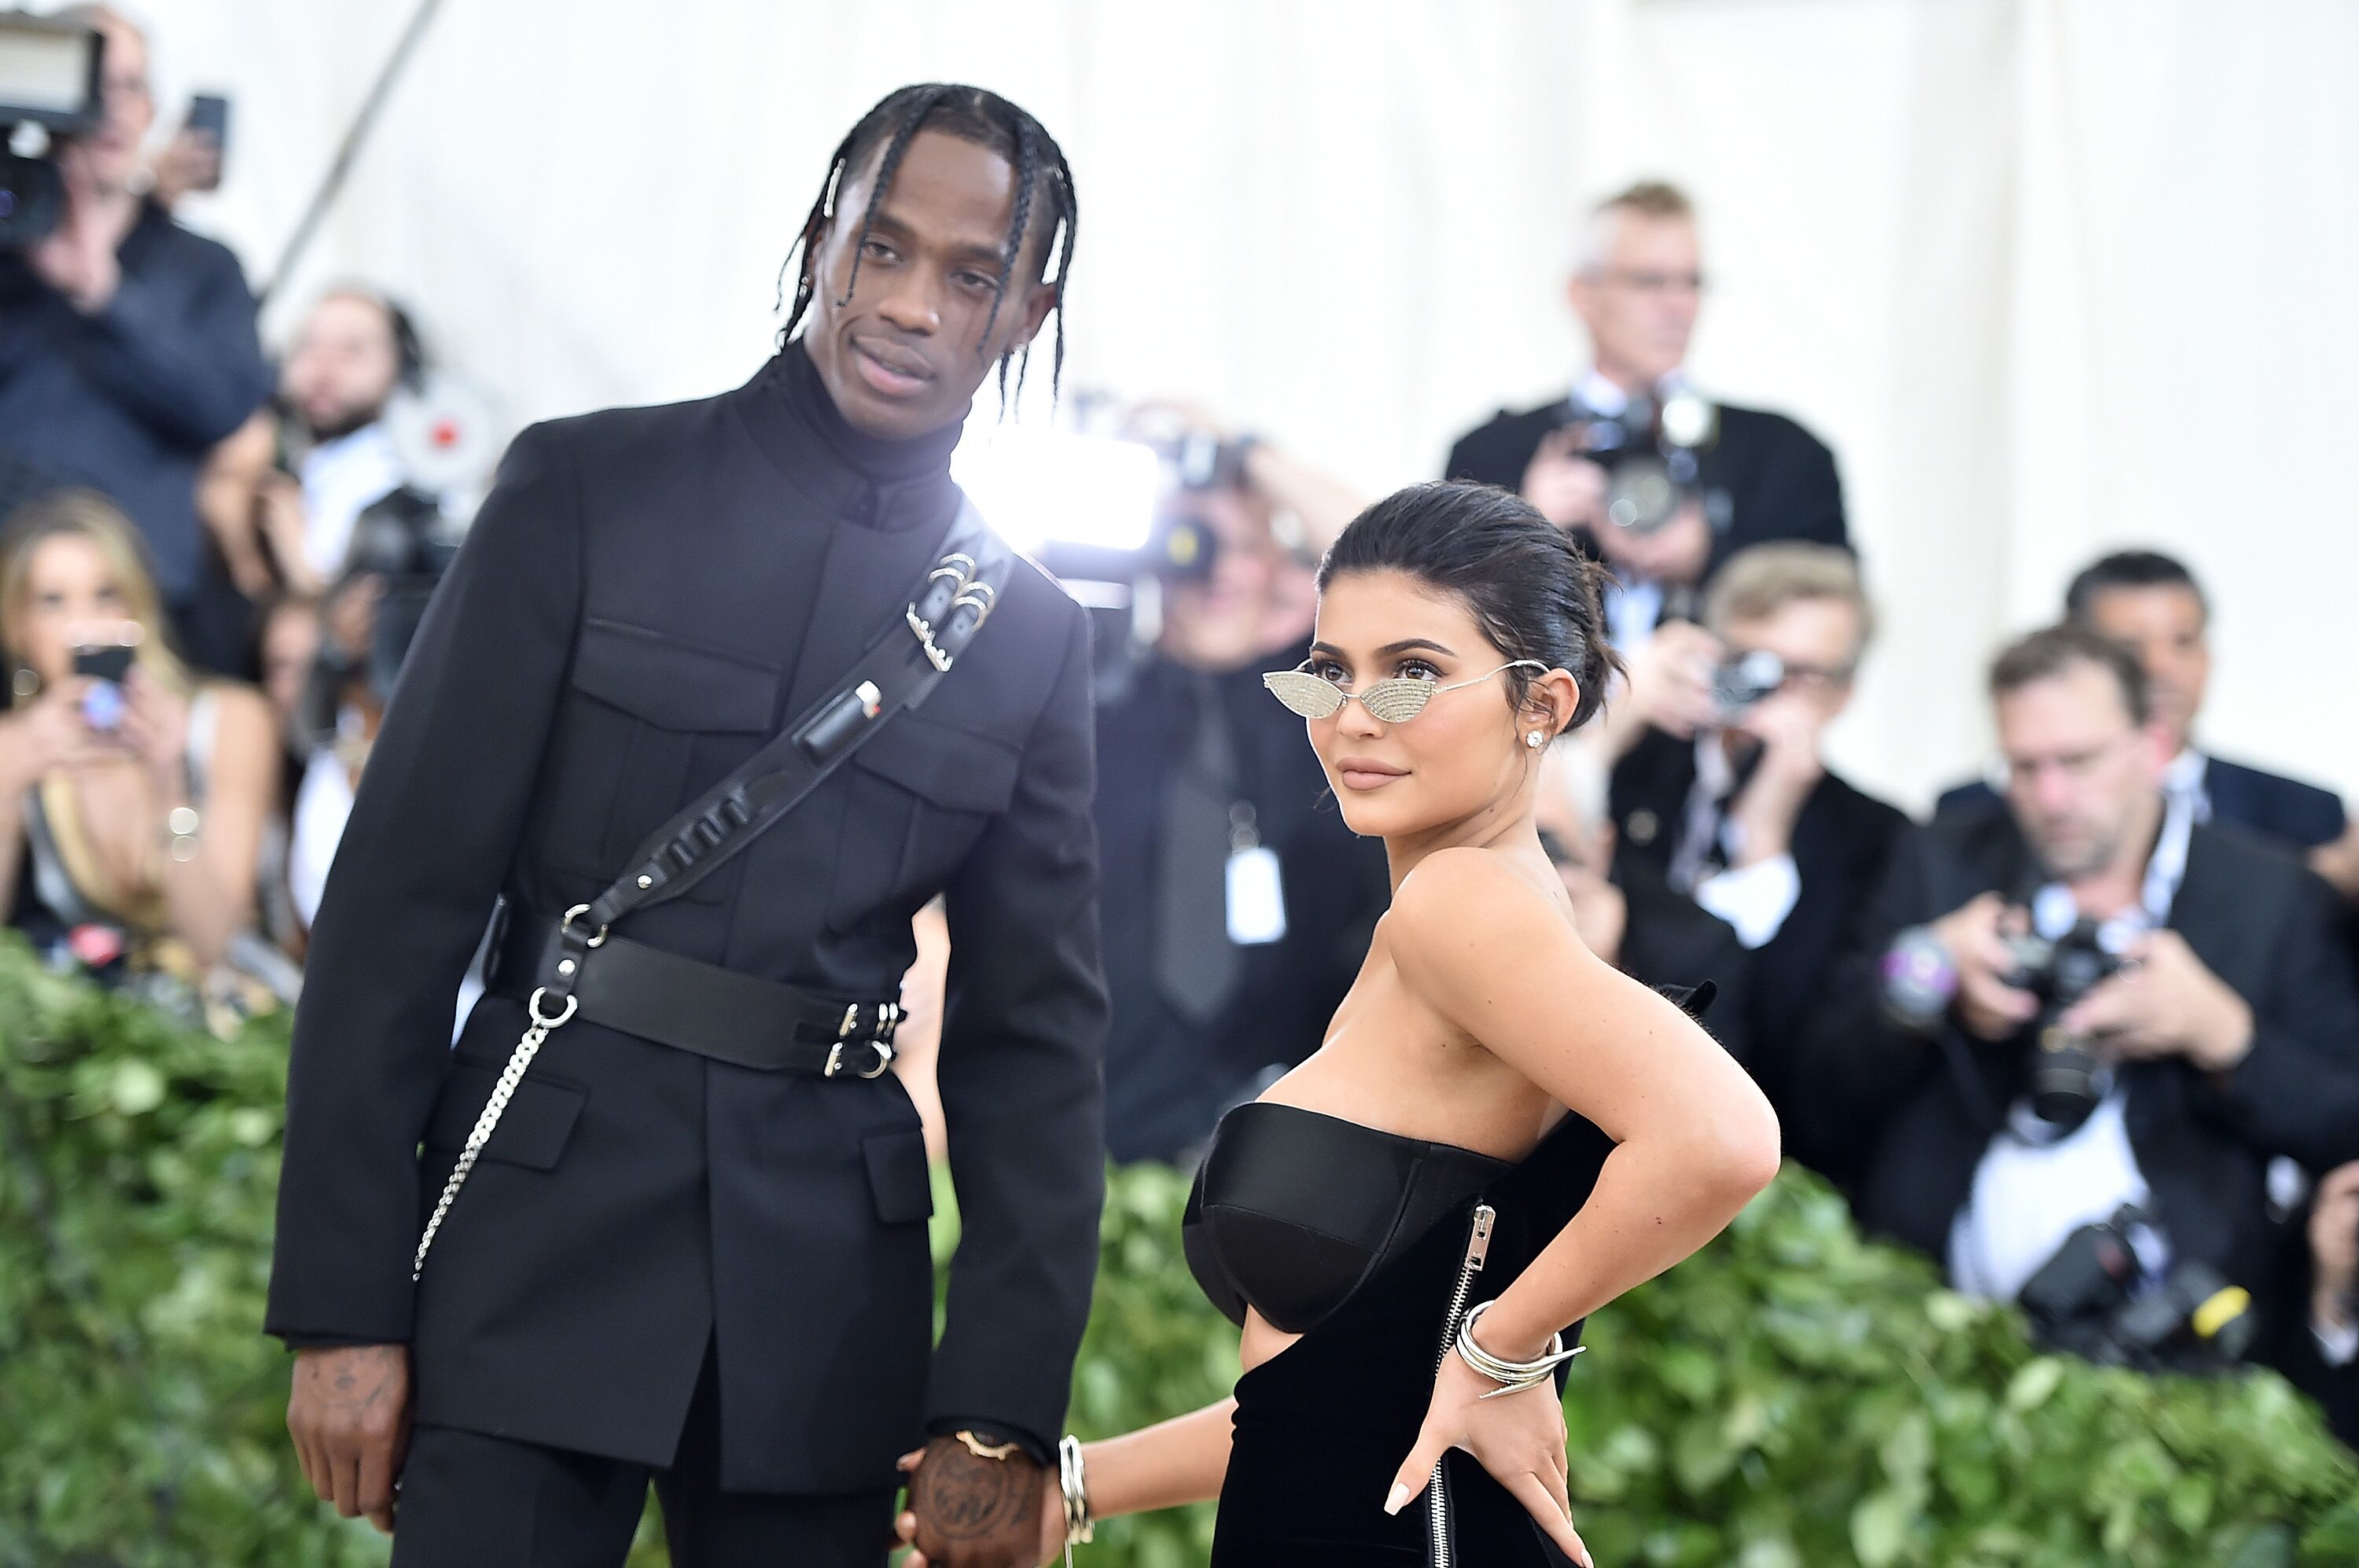 Kylie Jenner and Travis Scott on the red carpet of the MET Gala in New York | Source: Getty Images/GlobalImagesUkraine